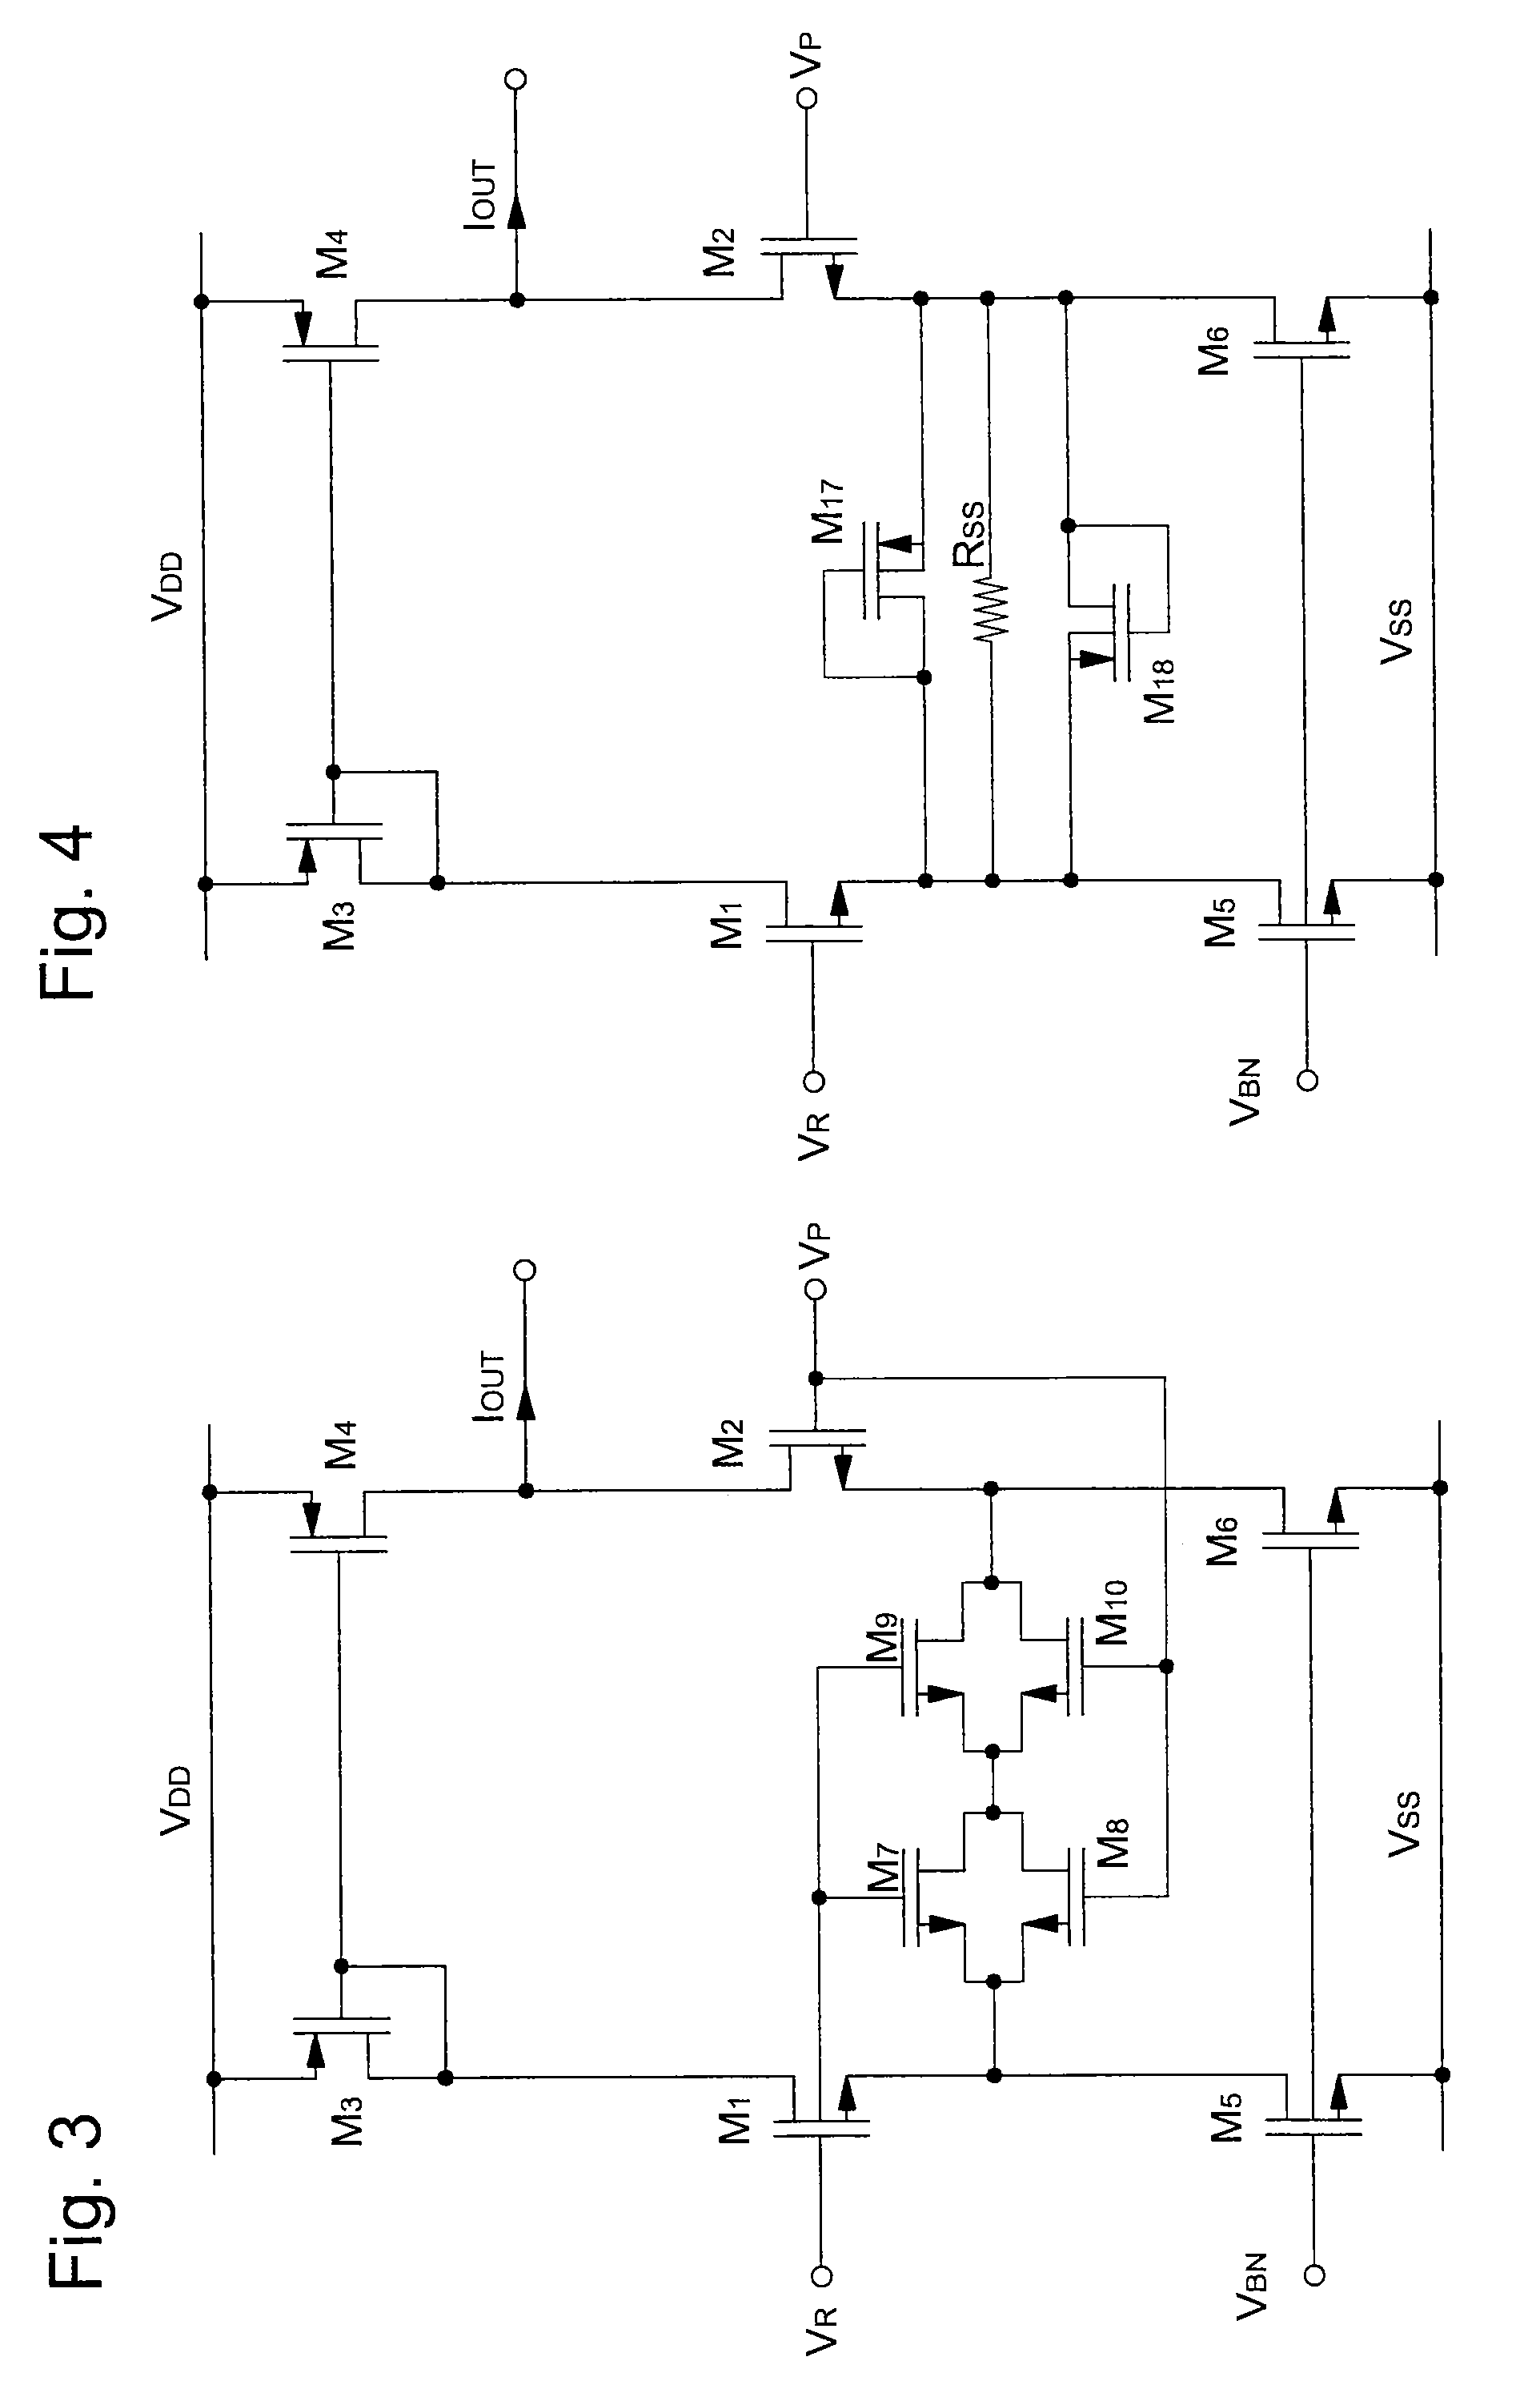 Automatic gain control electronic circuit with dual slope for an amplifier